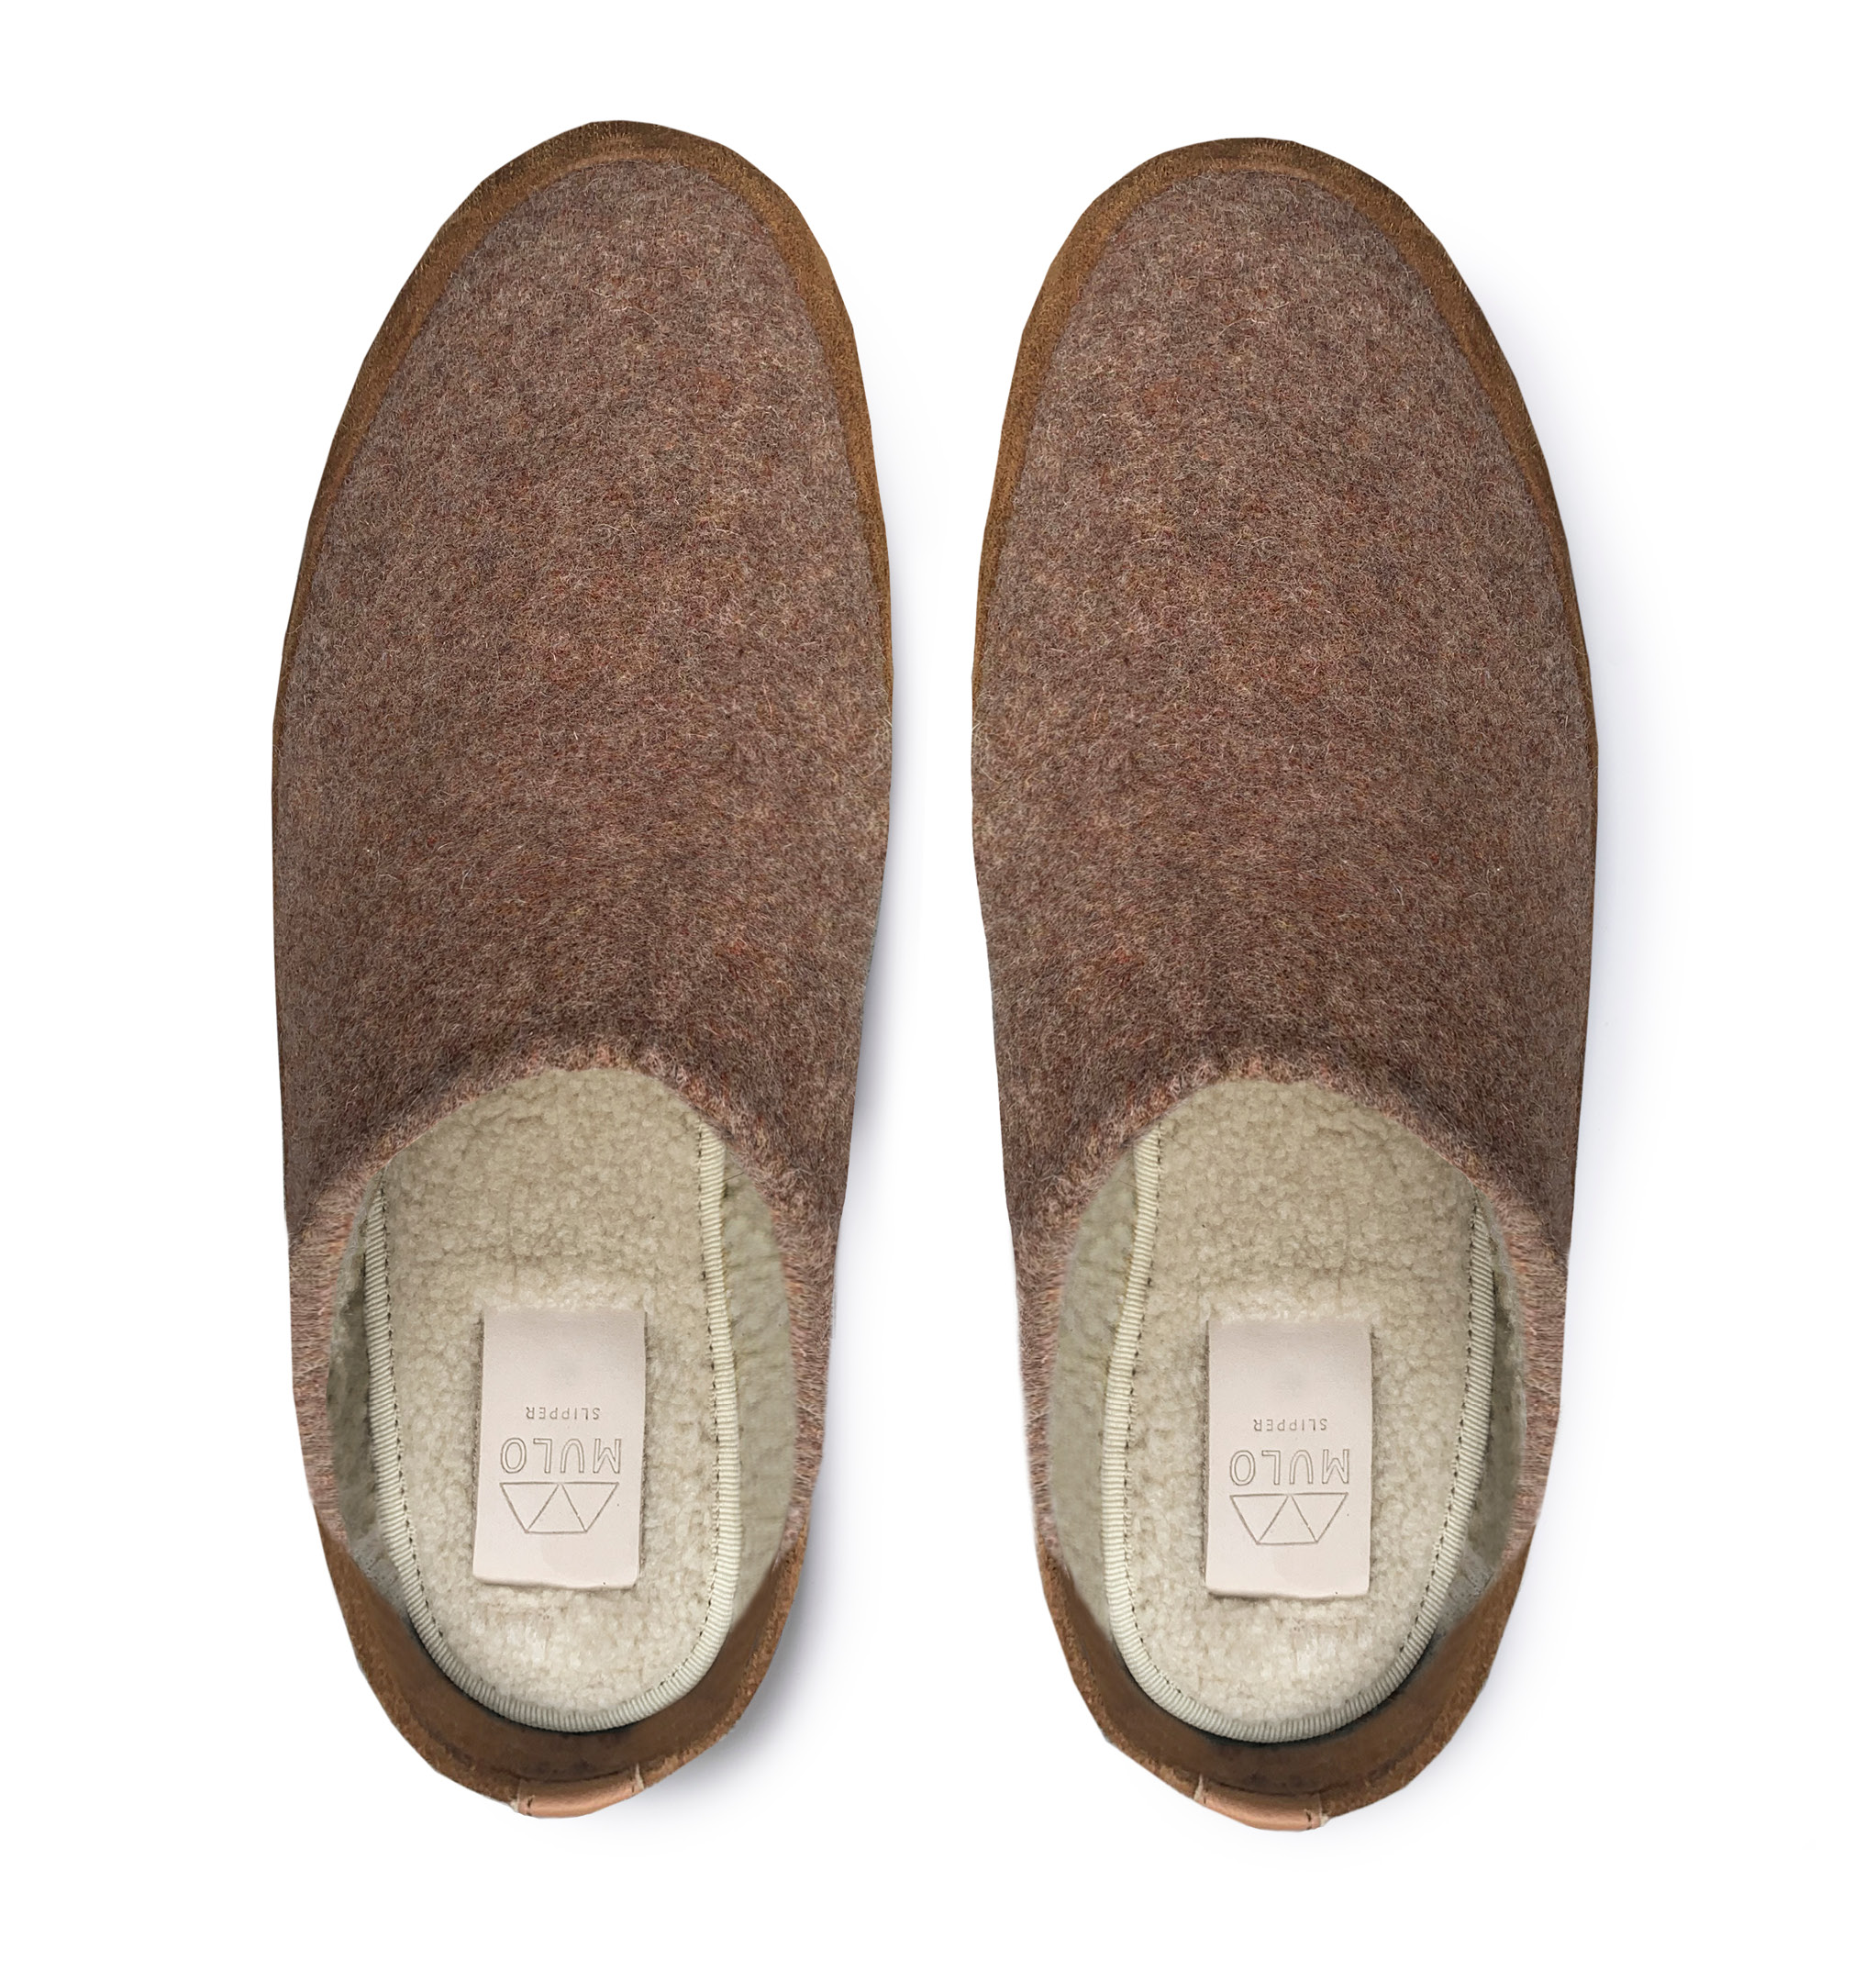 The Best Wool Slippers - Classic Style, Warm & Durable | Ambler - Ambler